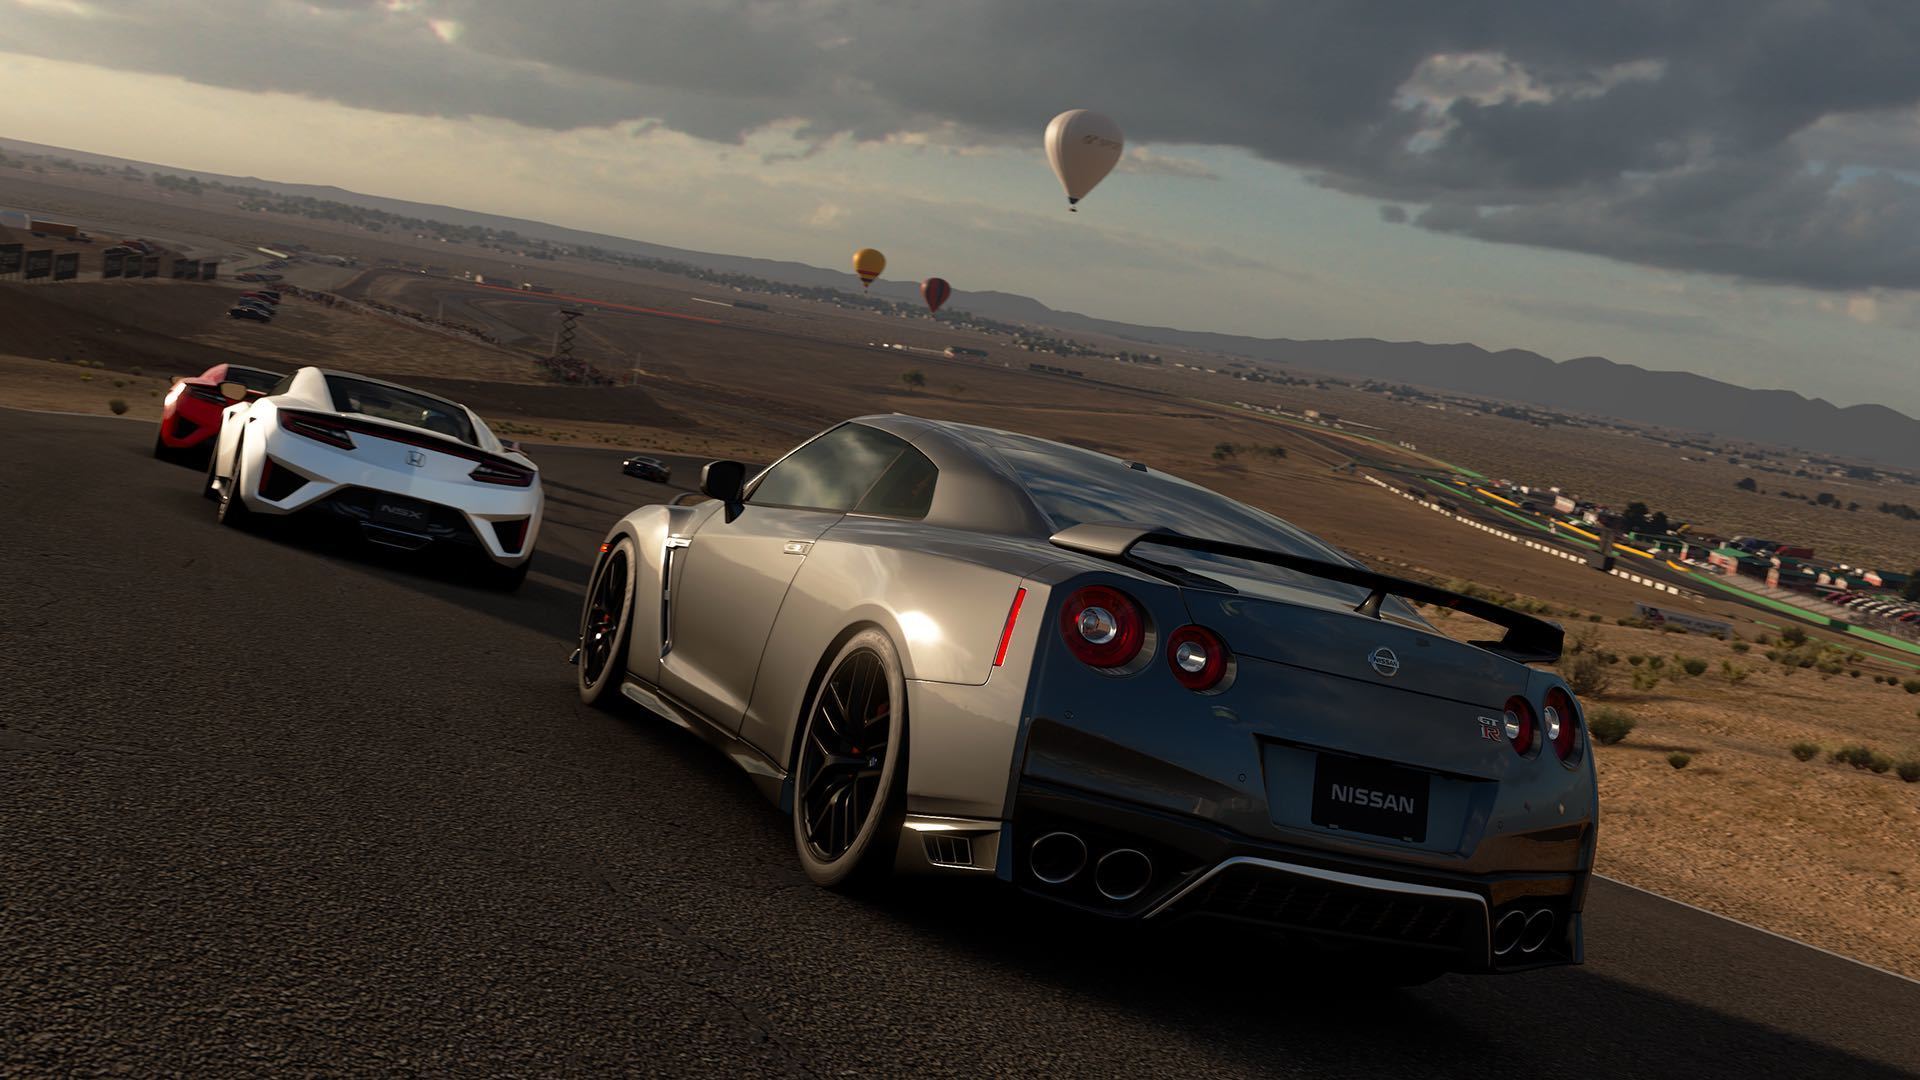 Most Of Gran Turismo 7 Is Online-Only - GameSpot